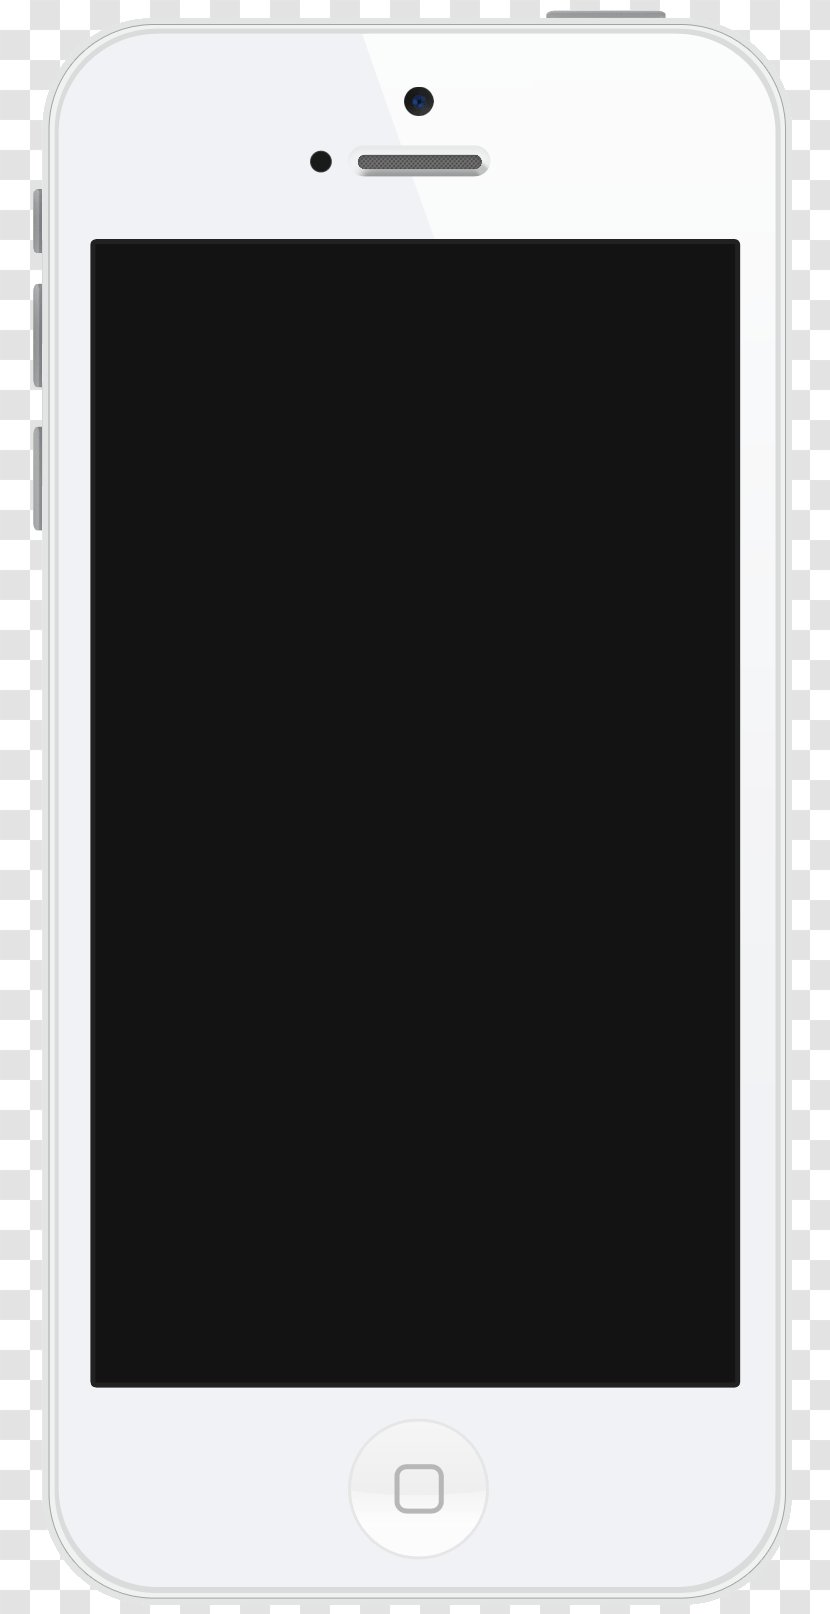 Feature Phone Smartphone Multimedia Mobile Device - Communication - Apple Iphone Image Transparent PNG